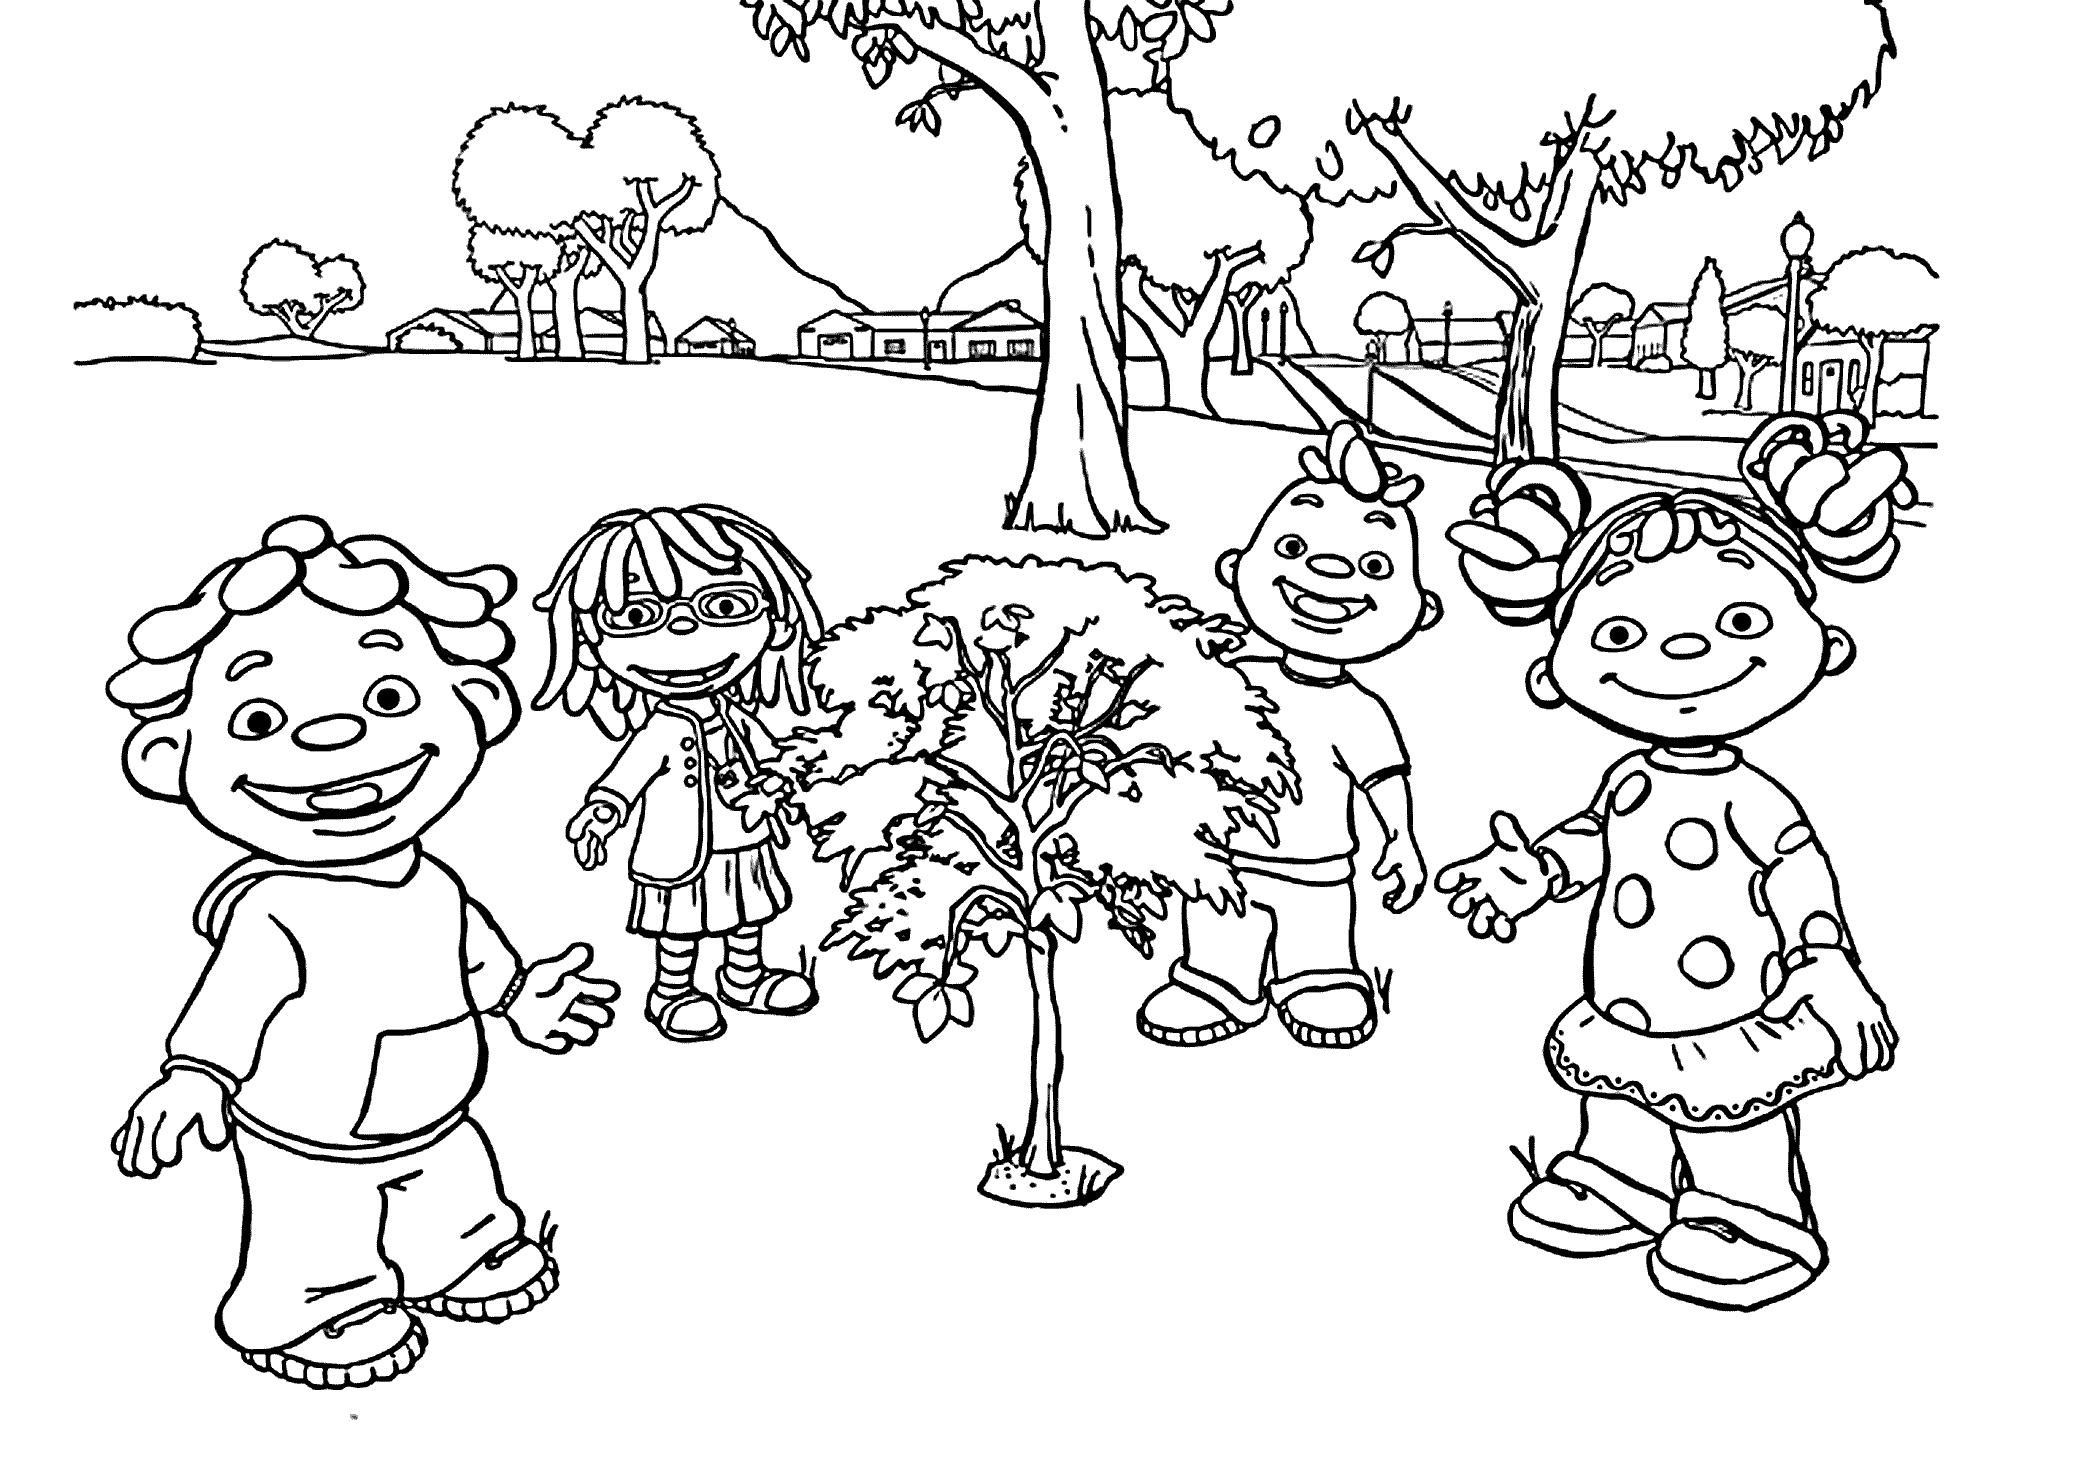 Sid the science kid coloring pages to download and print for free